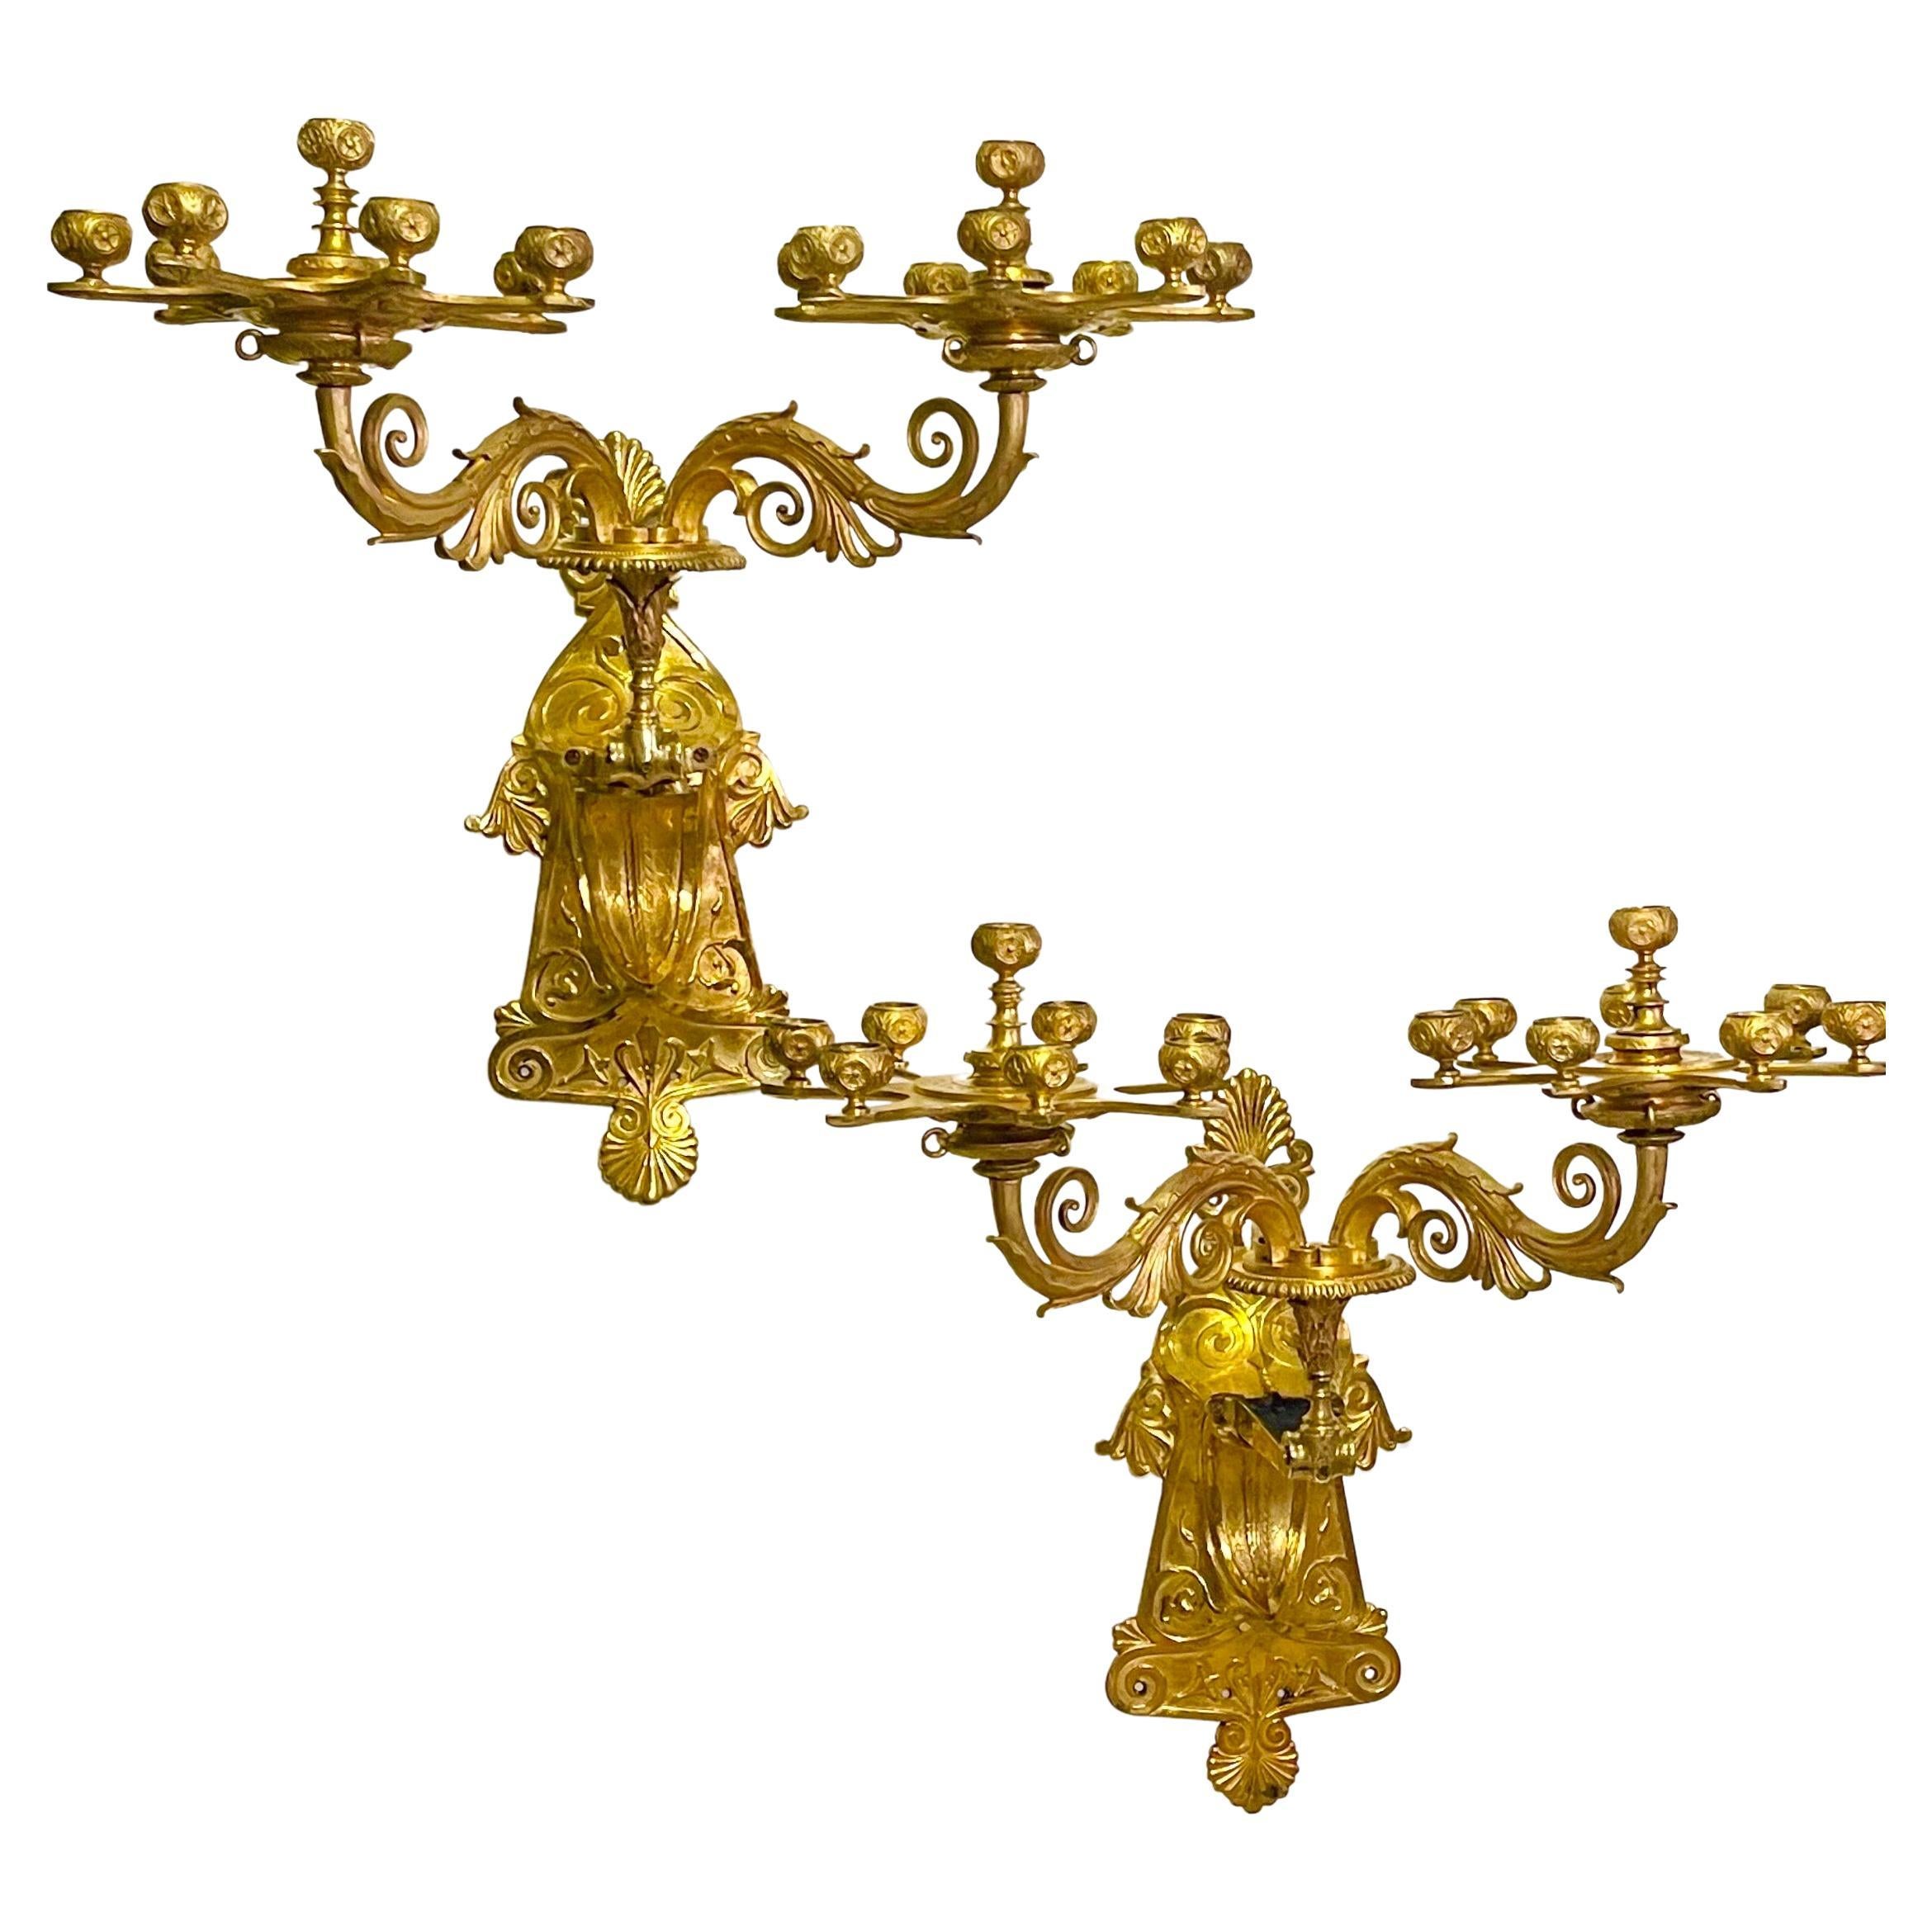 Pair of Stunning Russian Empire Period Ormolu Wall Sconces , ca. 1820s For Sale